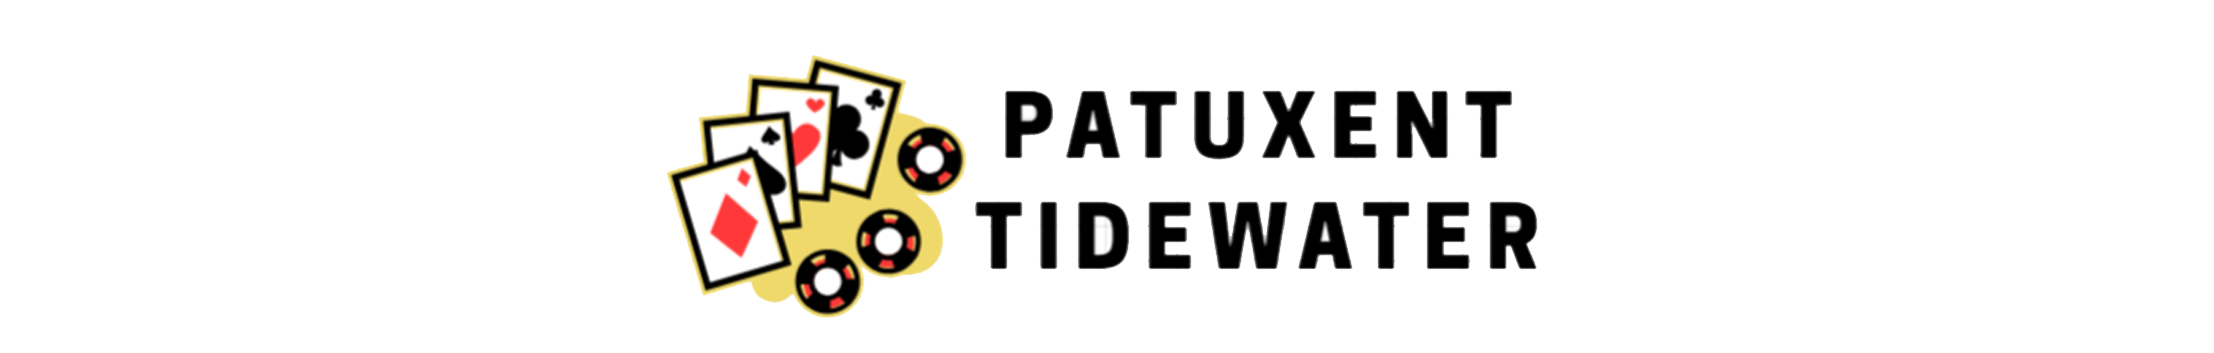 patuxent-tidewater.org